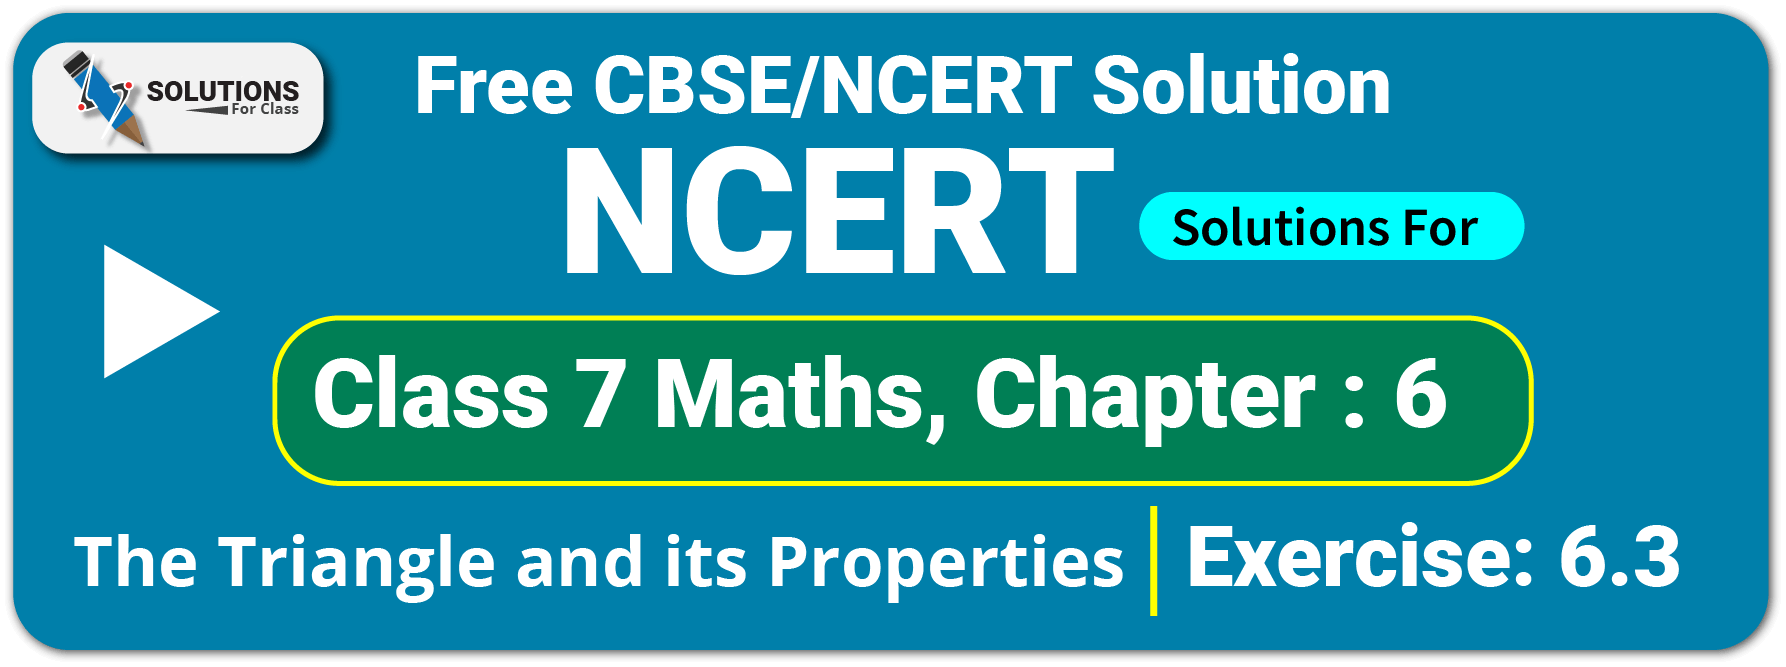 NCERT Solutions Class 7 Maths Chapter 6 The Triangle and its Properties Exe.6.3